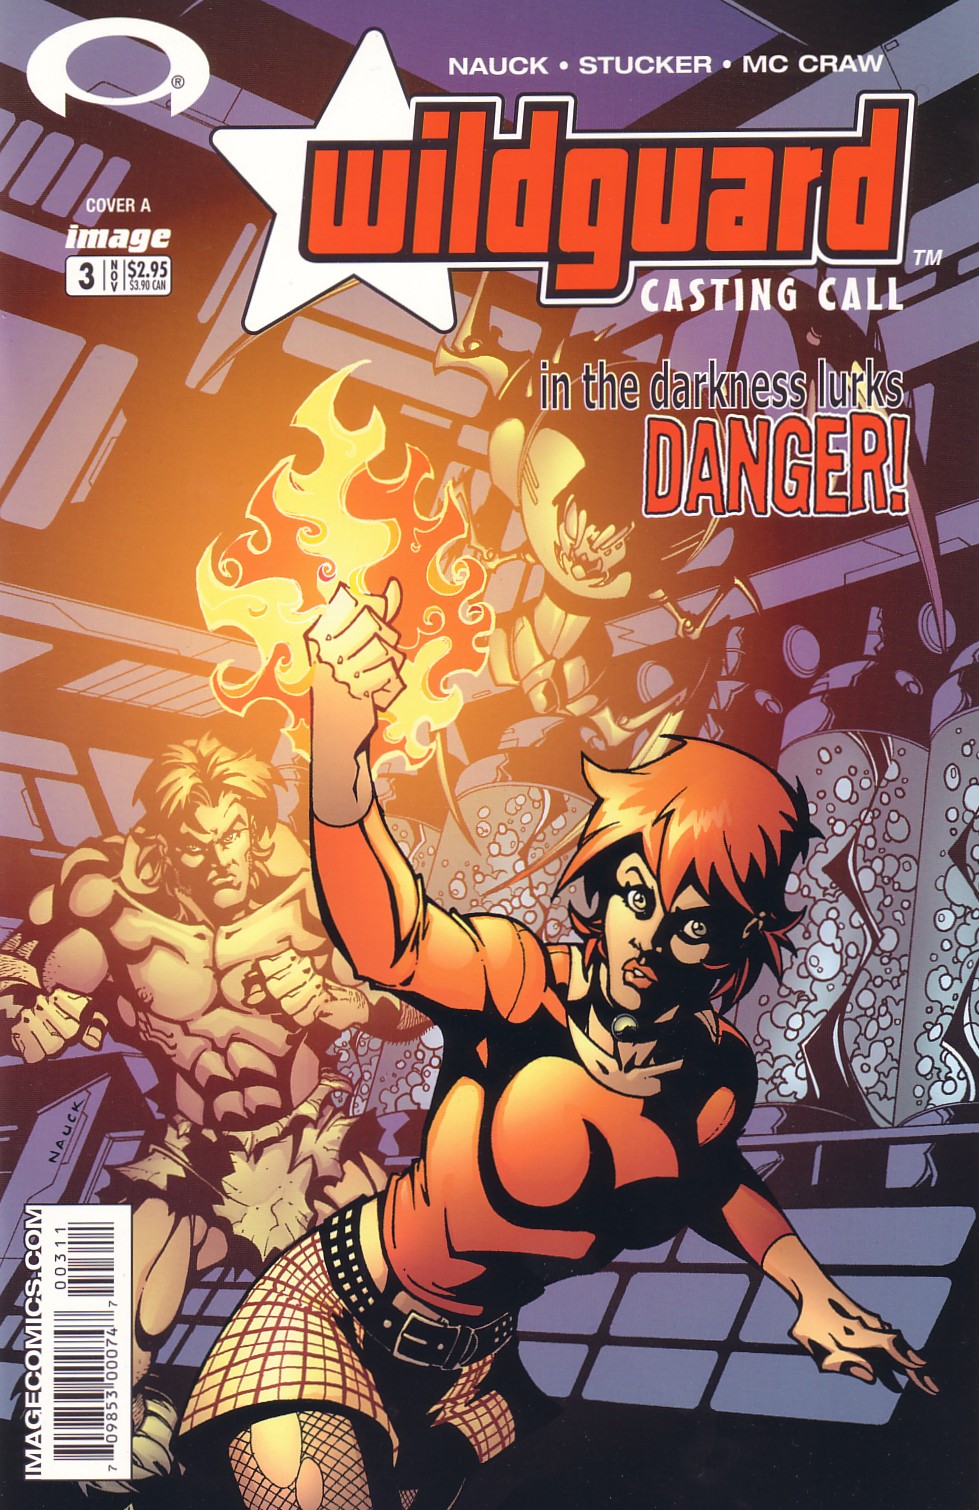 Read online Wildguard: Casting Call comic -  Issue #3 - 1